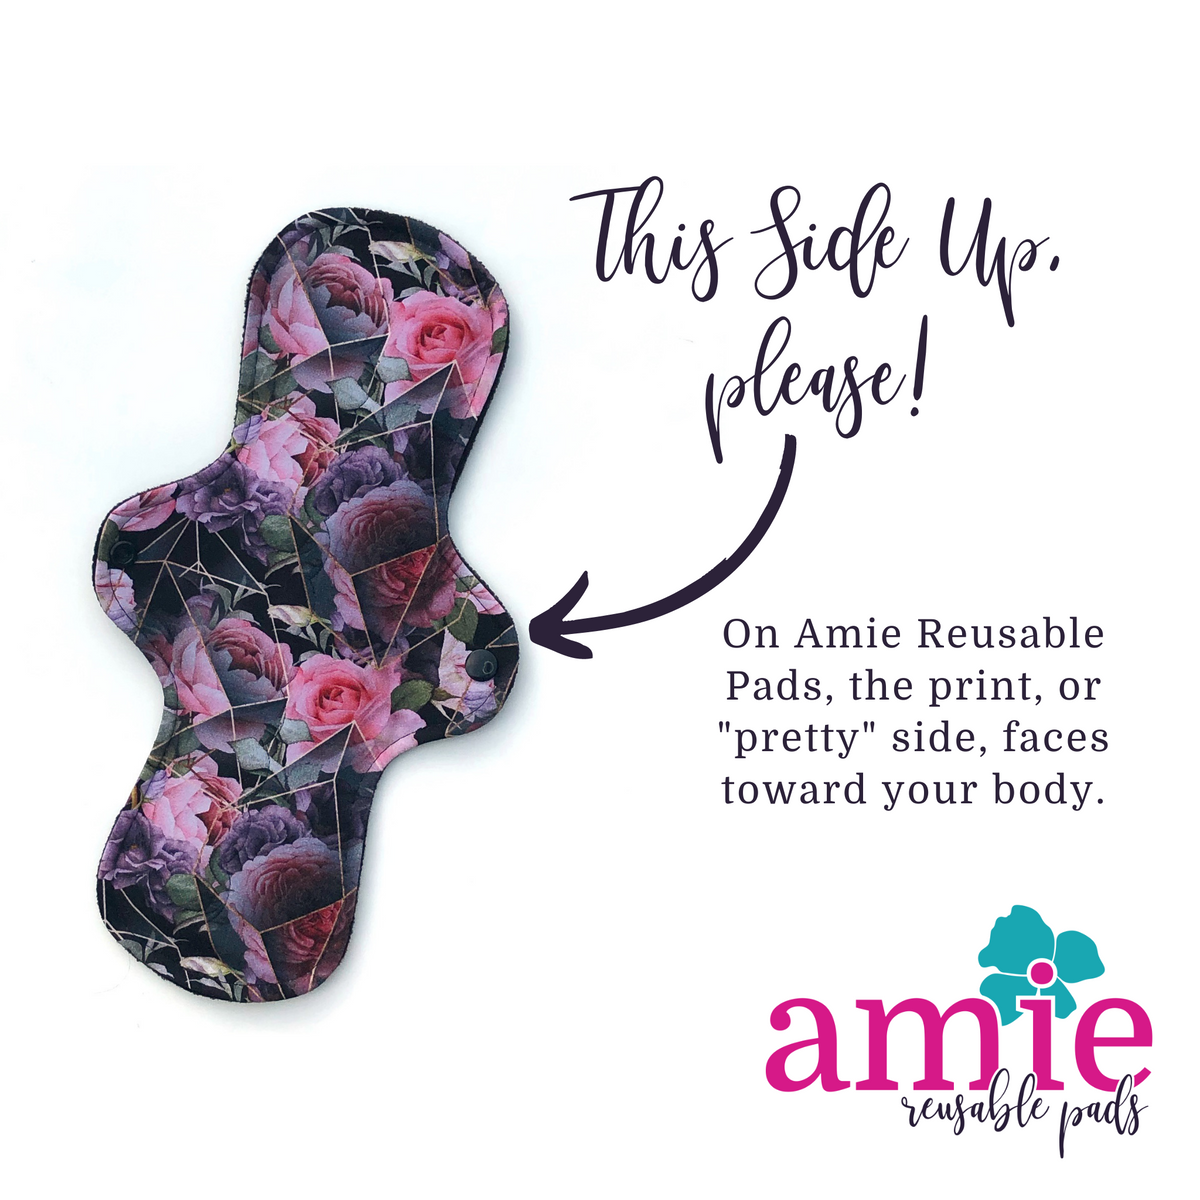 Instruction for showing the pretty-side faces up toward your body when using an Amie reusable cloth pads